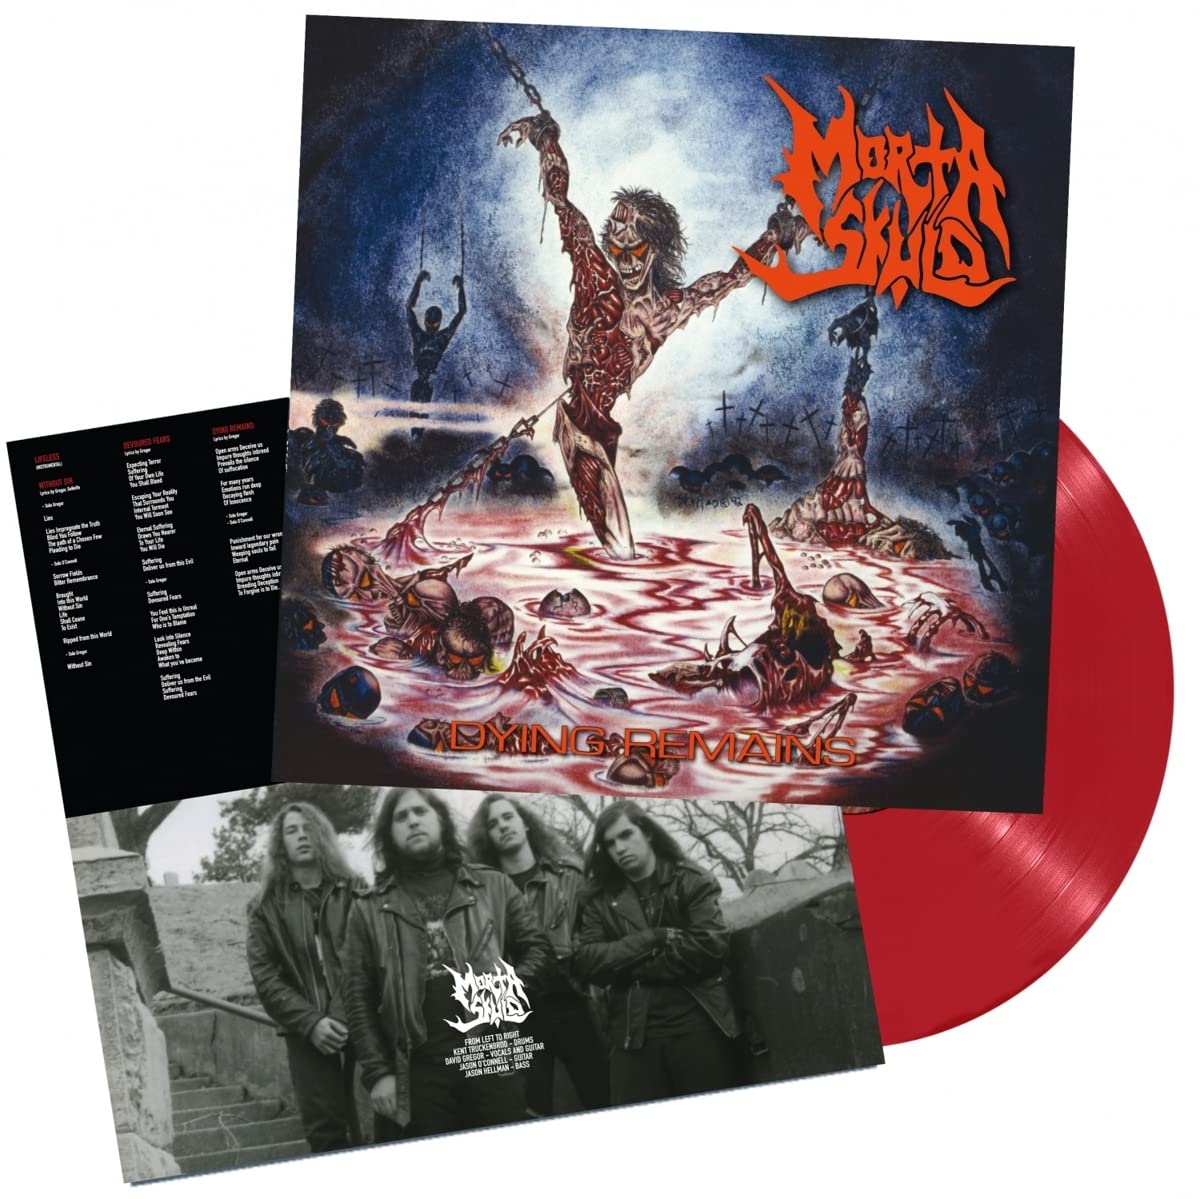 Morta Skuld Dying Remains 30th Anniversary Limited Red Vinyl LP